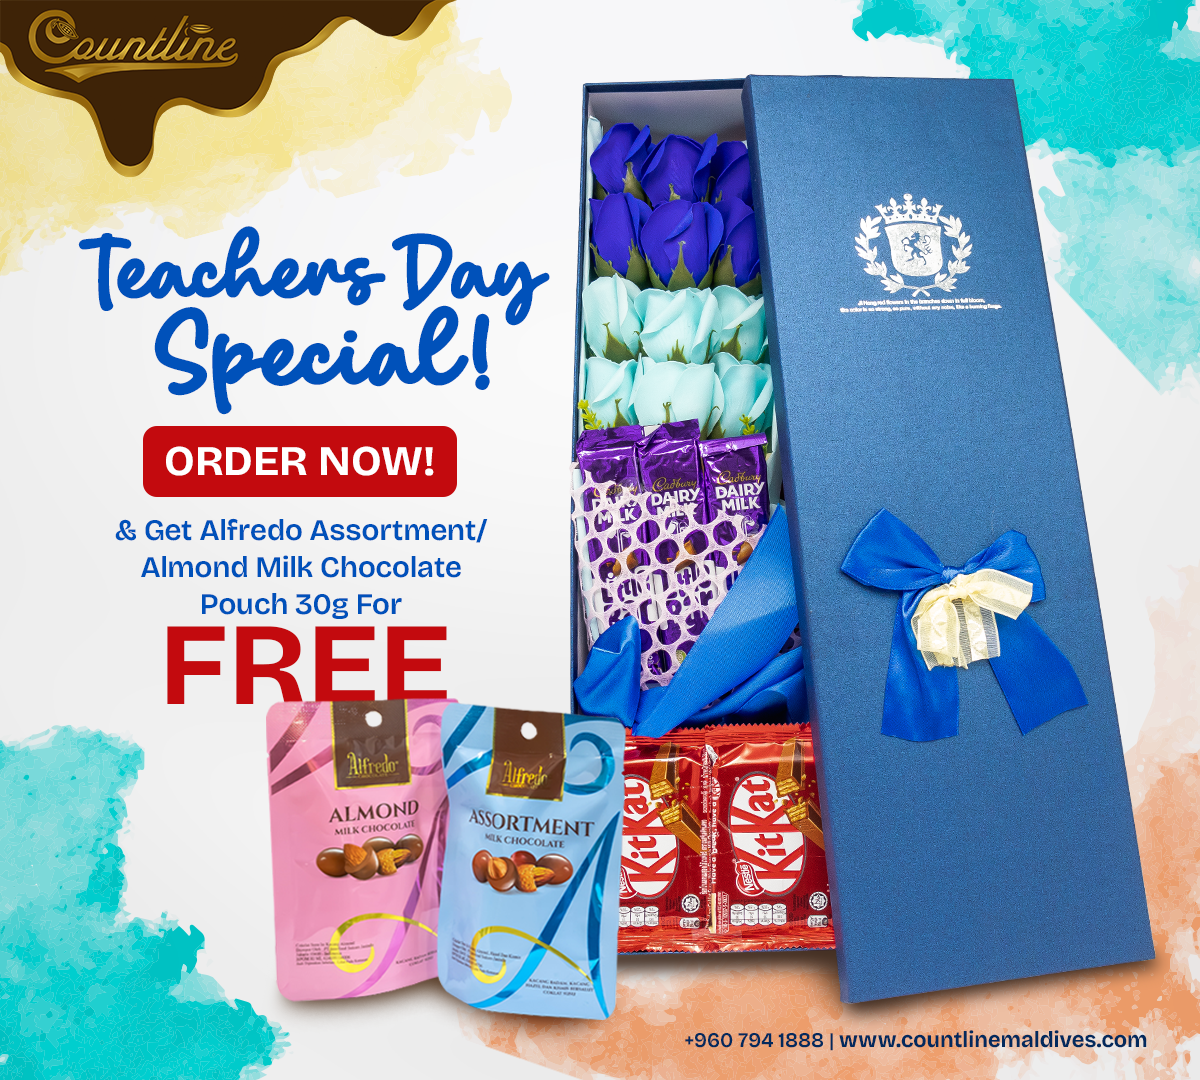 Teachers Day Special Gift Box With a FREE GIFT